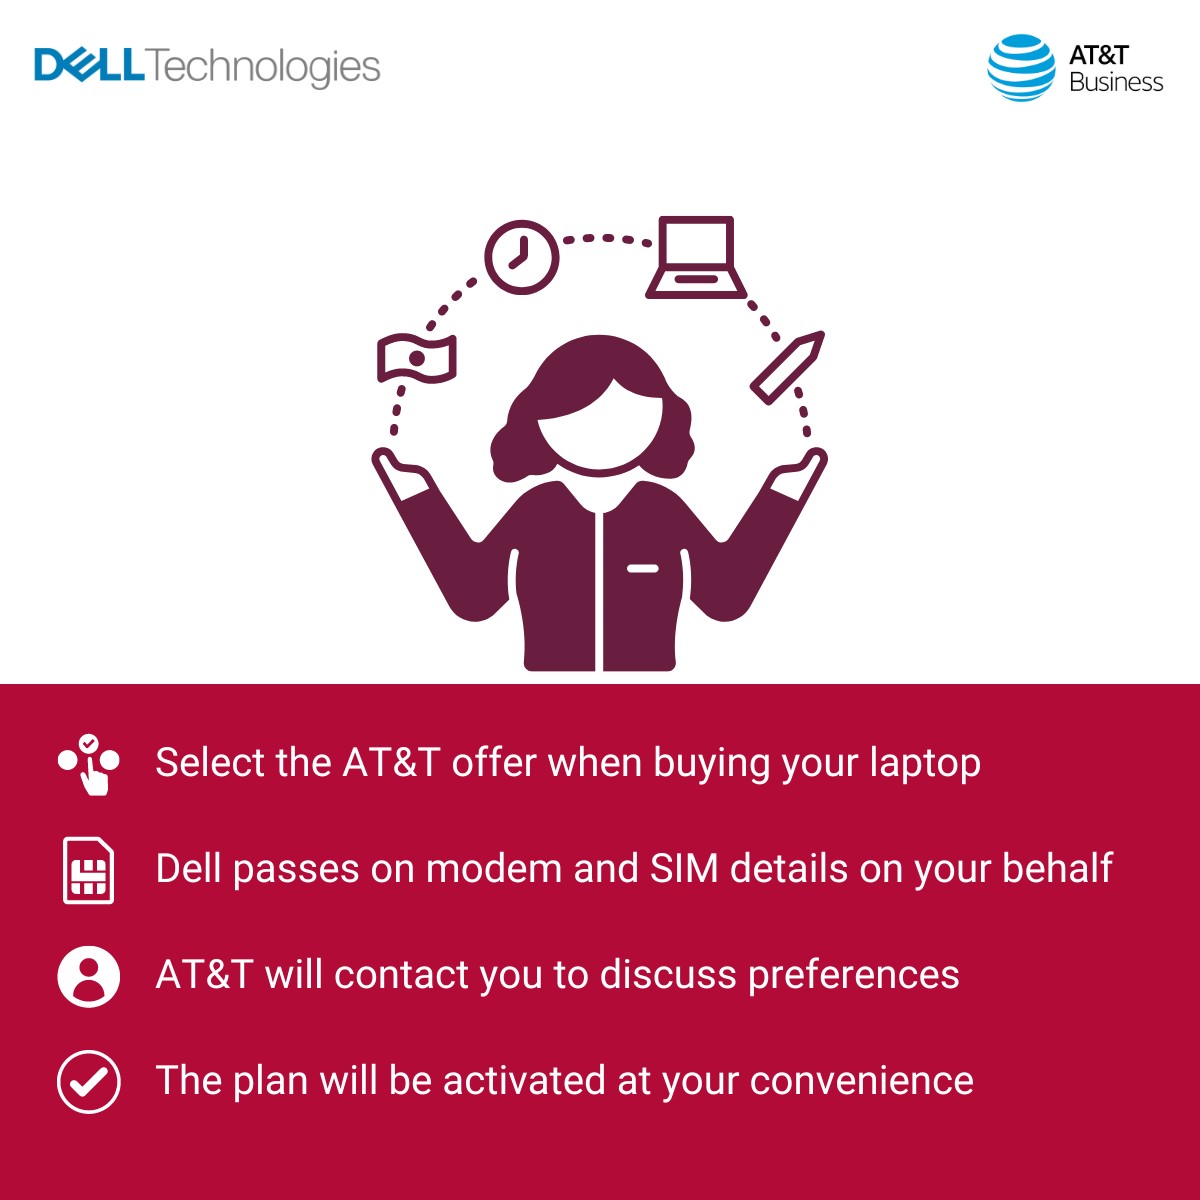 Experience ultimate connectivity with Dell and AT&T’s new partnership! Bringing seamless activation and incredible convenience to all PCs with mobile broadband!

Learn more about Connected PCs here: dell.to/4blhz5S

#connectivity #connectedpc #iwork4dell
 #iwork4dell